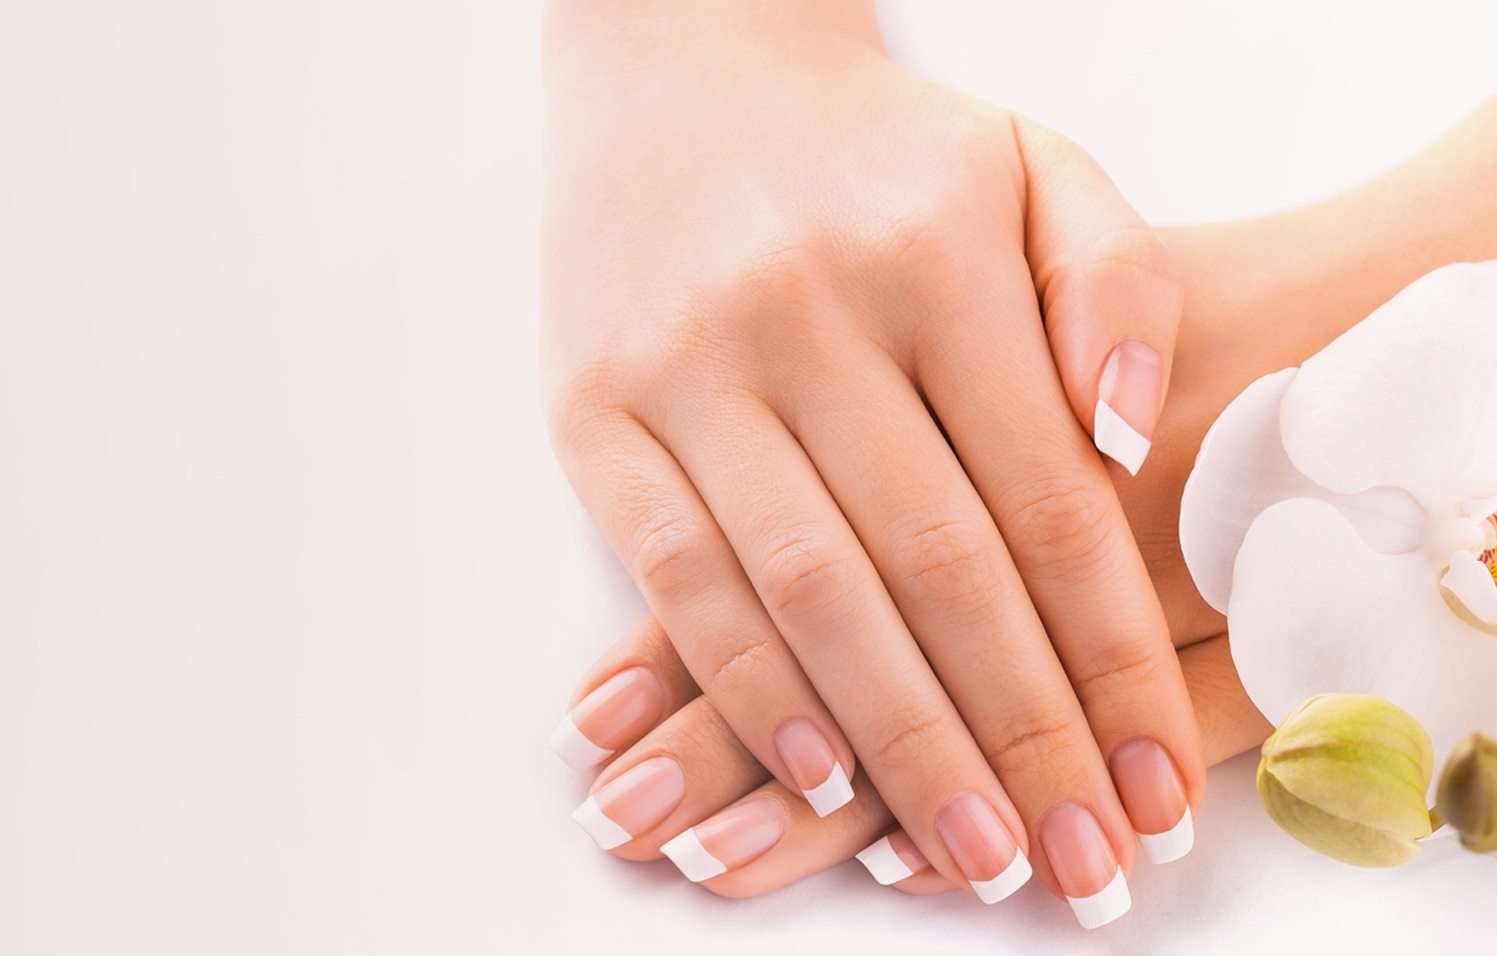 Grow Your Nails In Just 5 Days With These Home Remedies